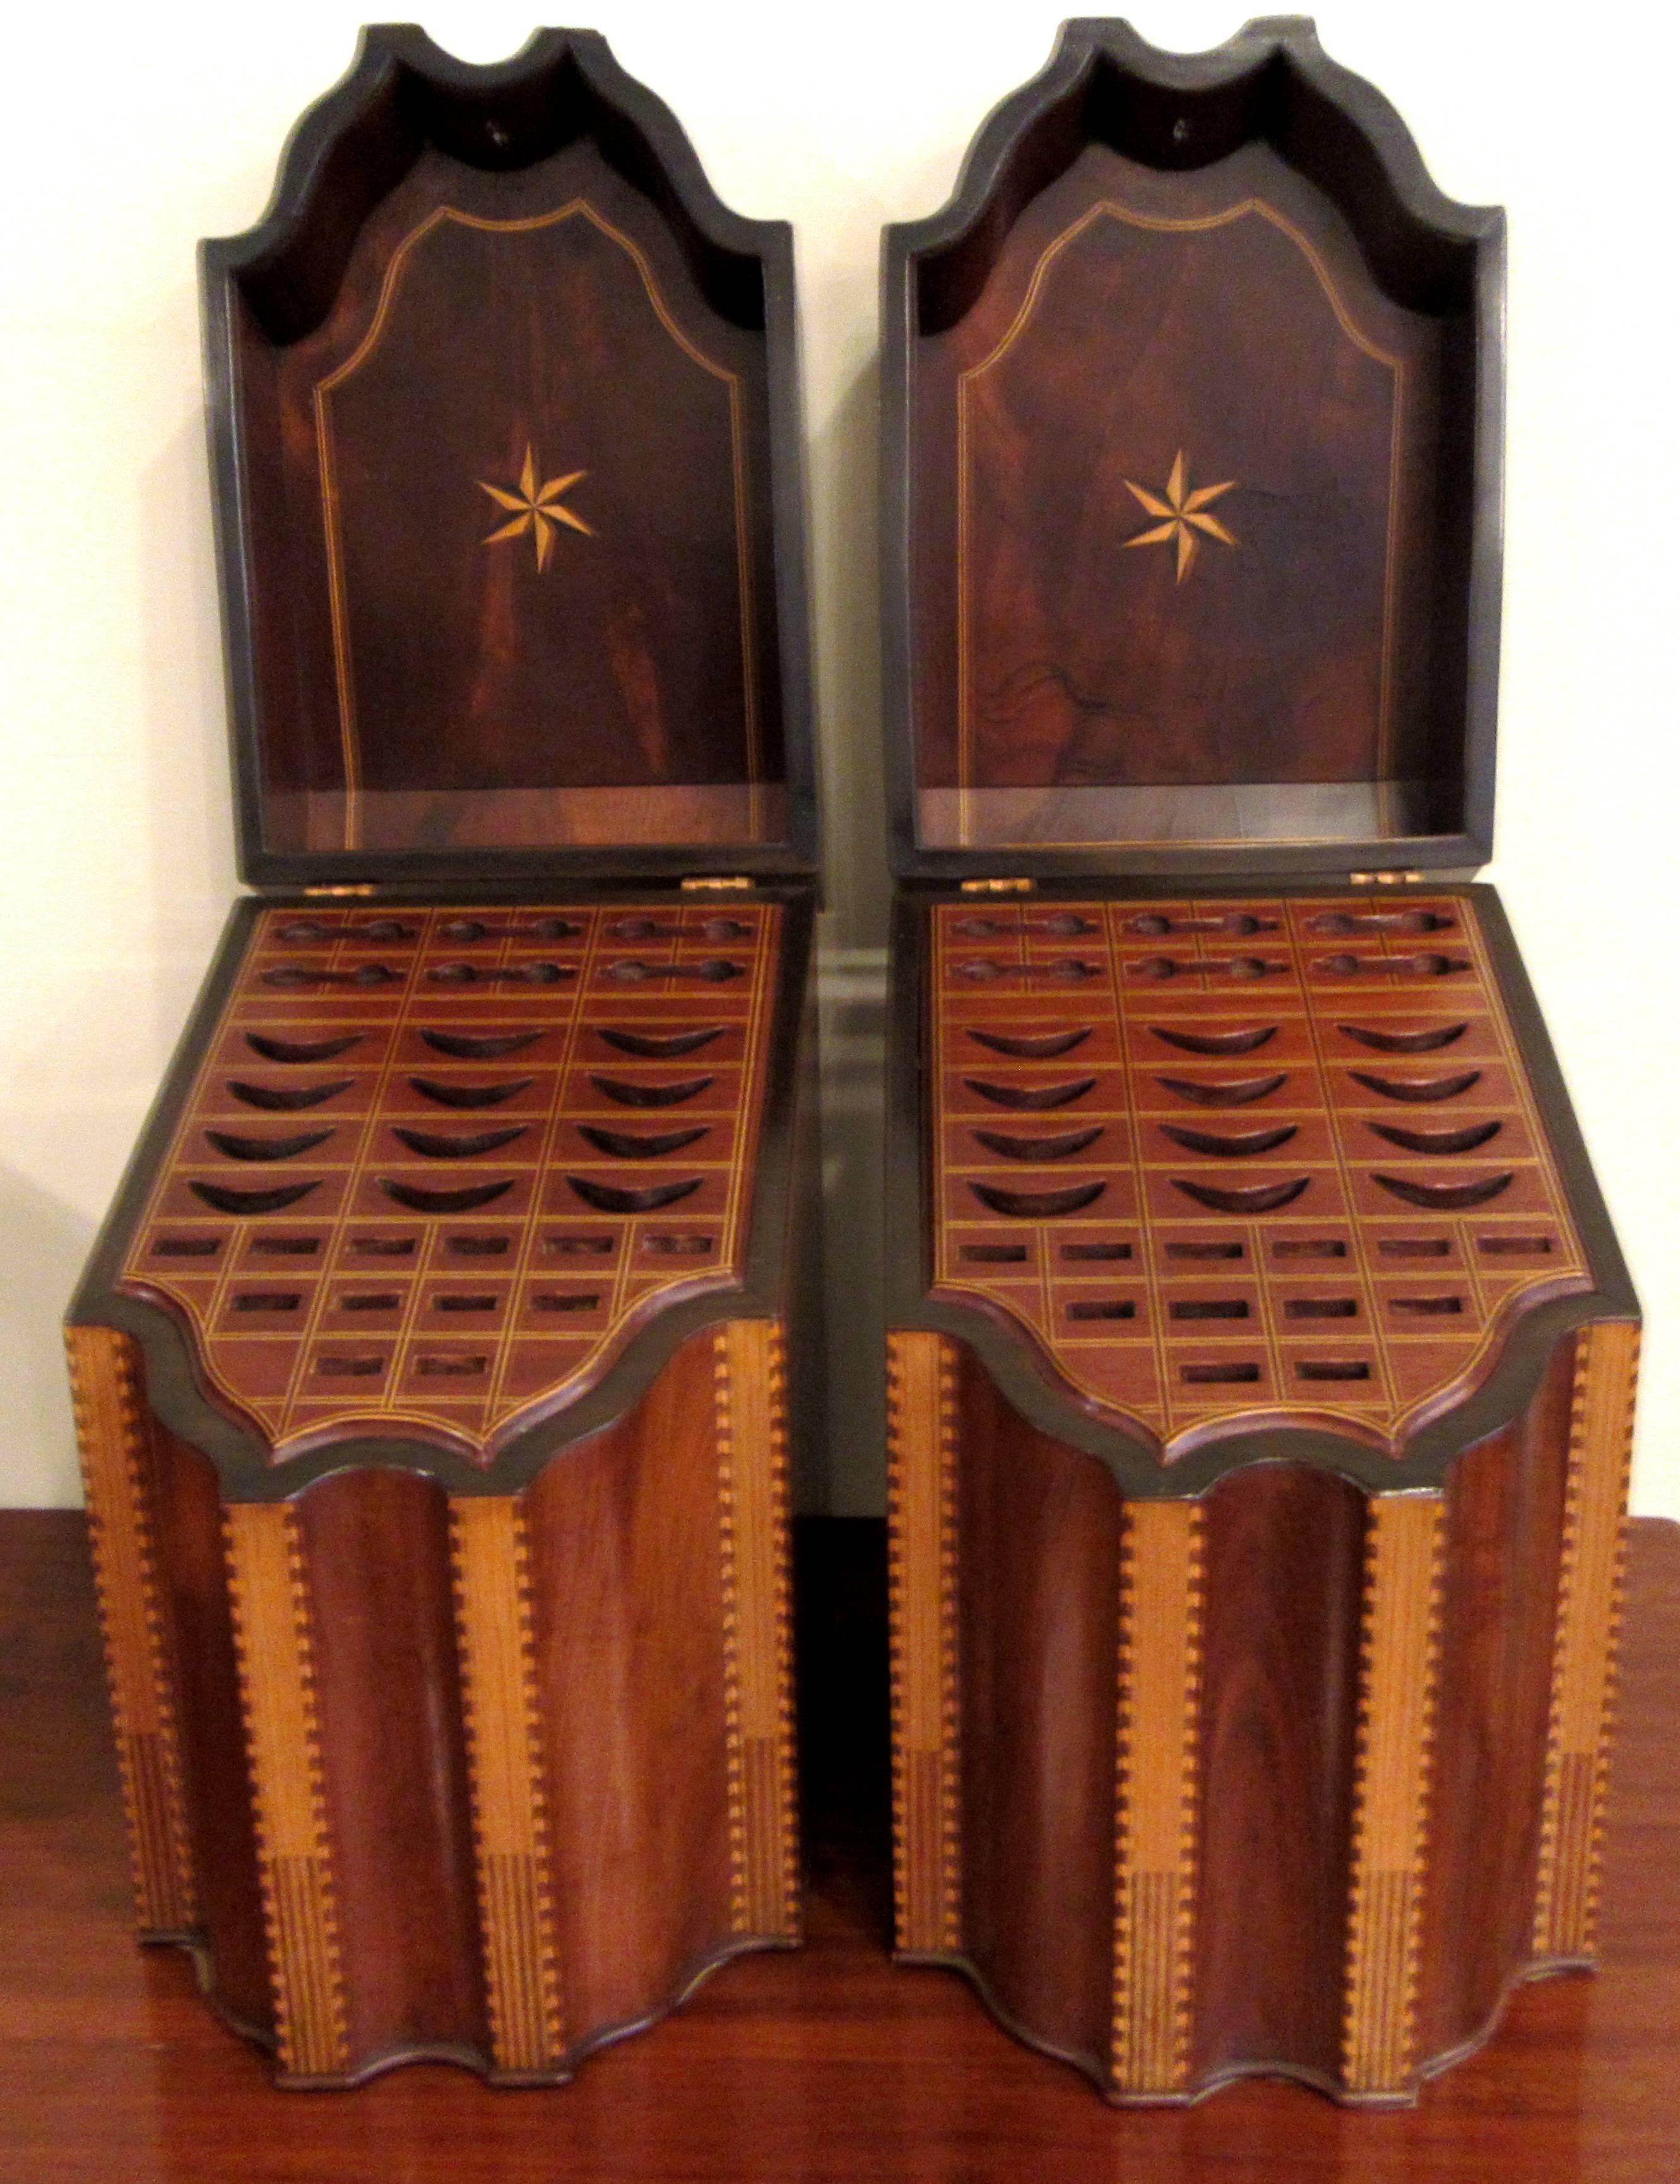 A stunning bookend pair of slant top, serpentine form knife / cutlery boxes with inserts. Inlaid banding, shell and star detail.